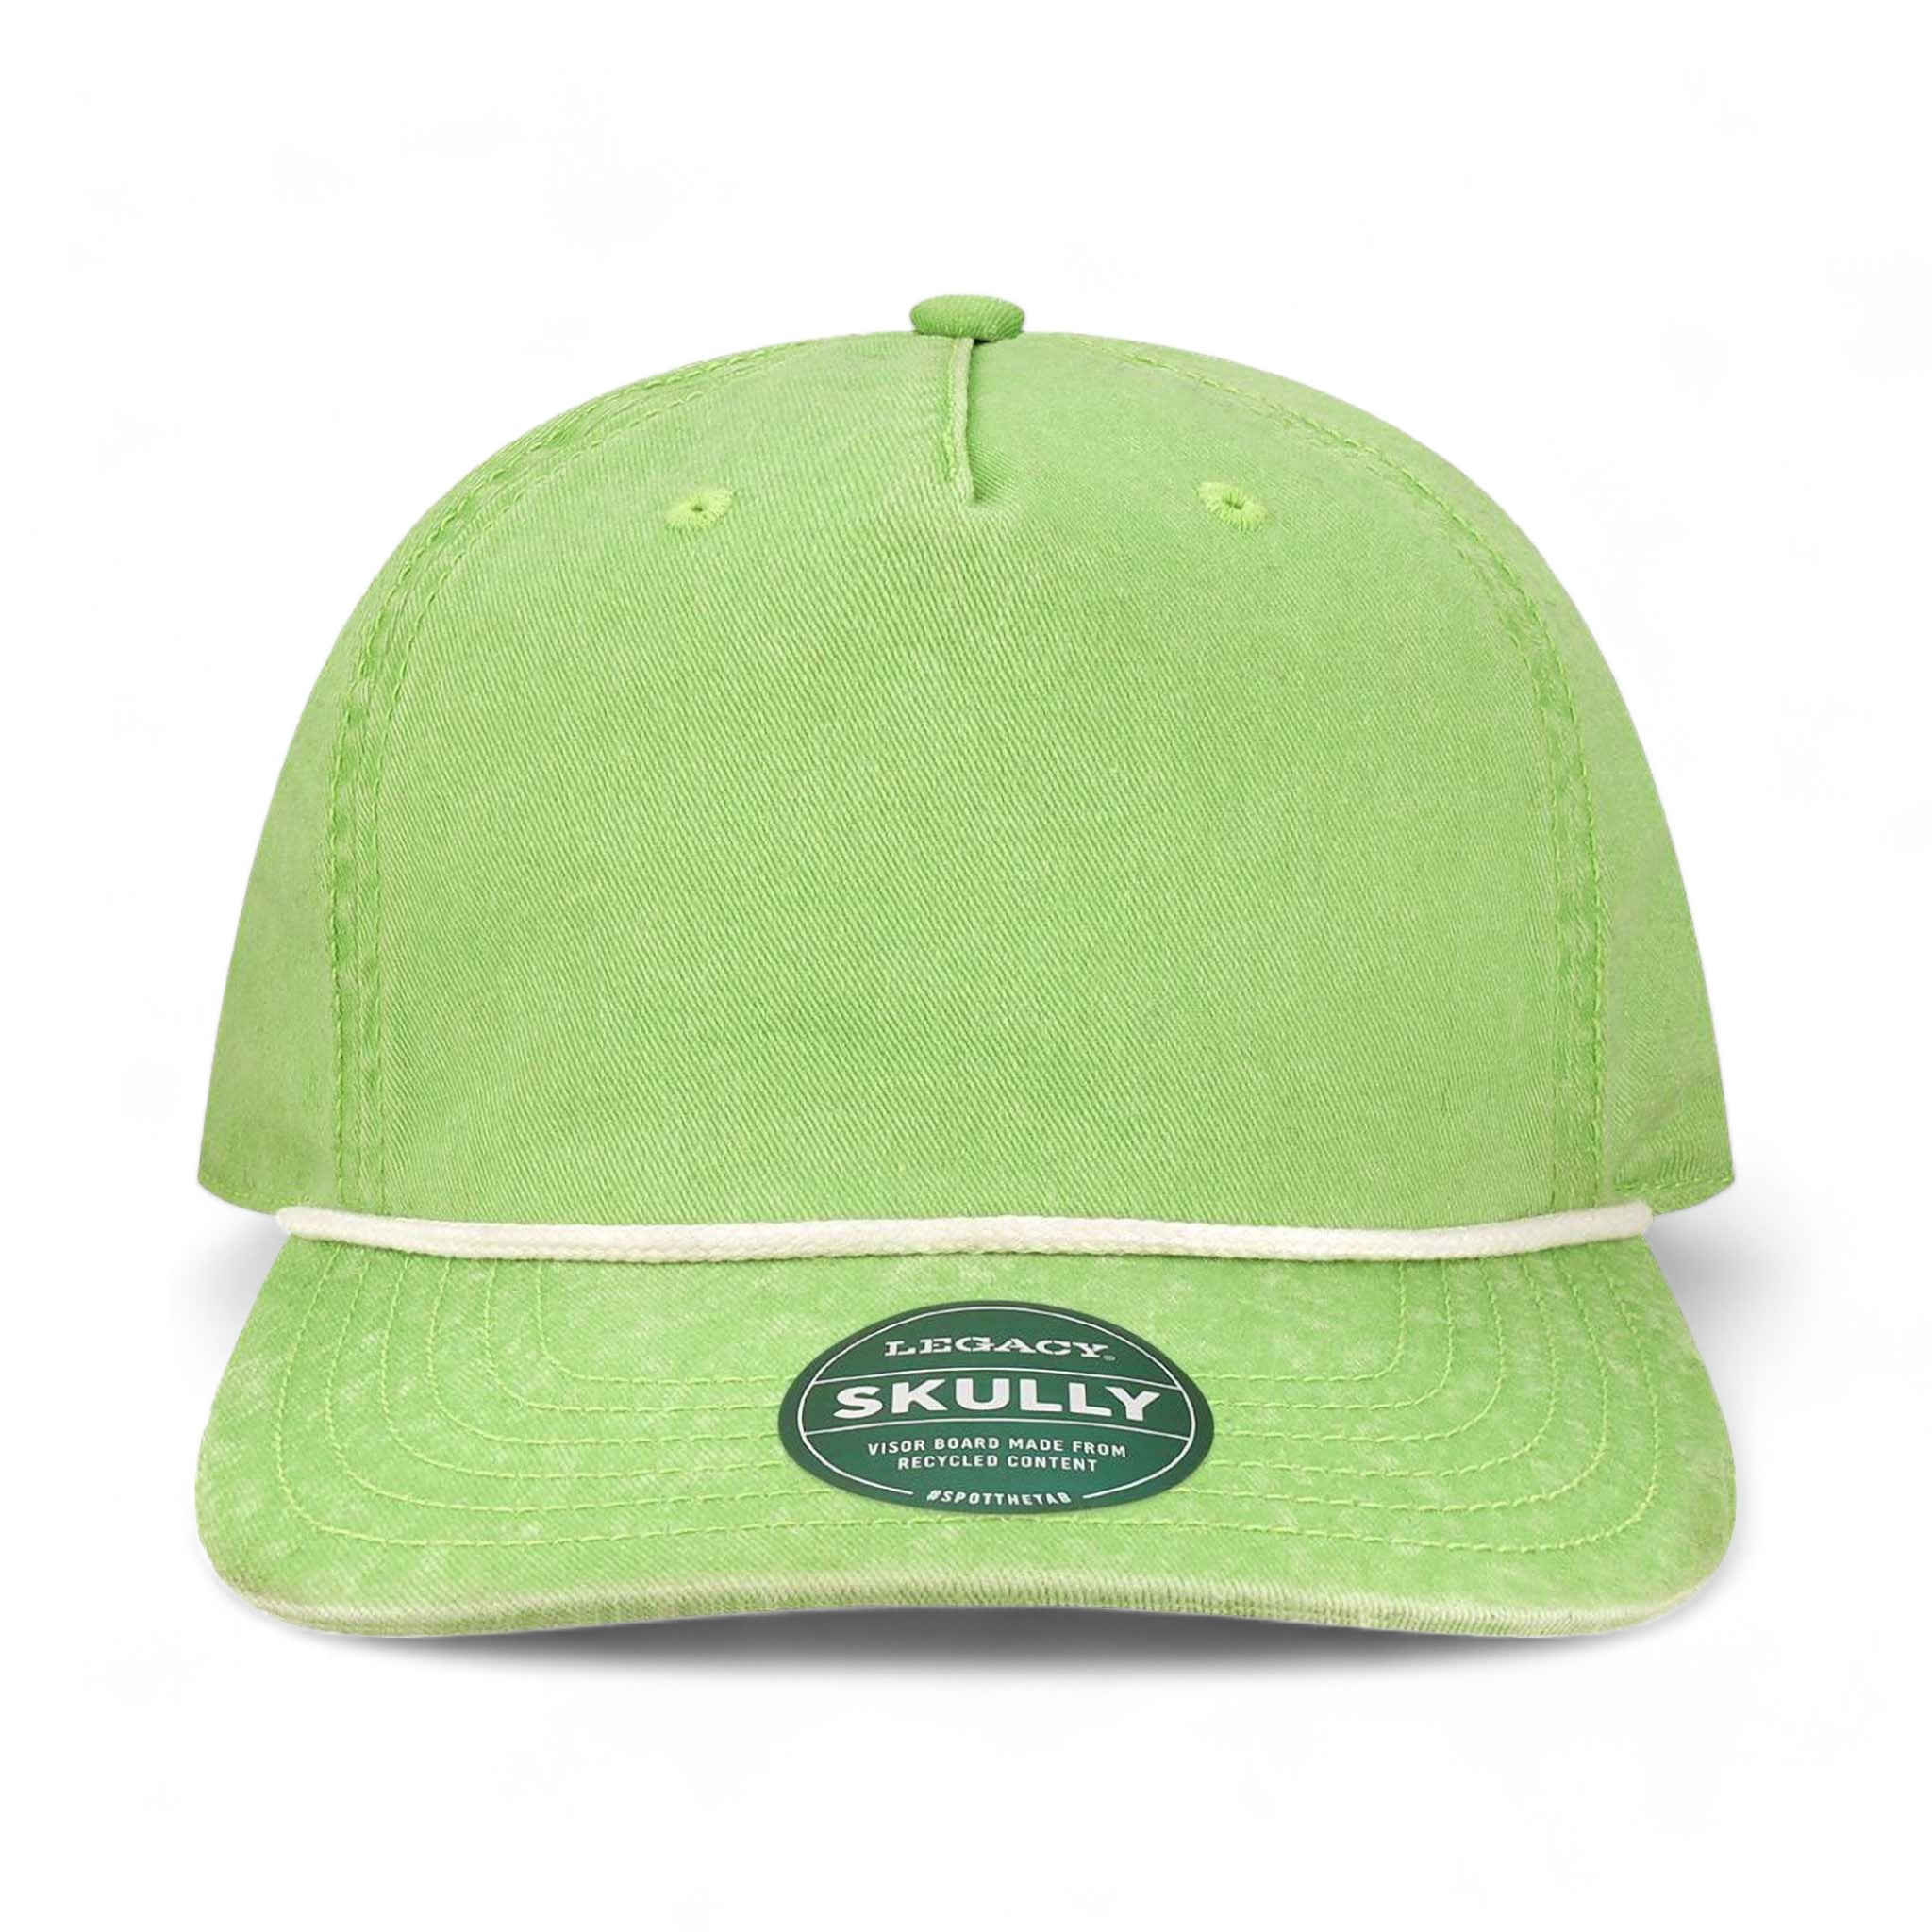 Front view of LEGACY SKULLY custom hat in lime green